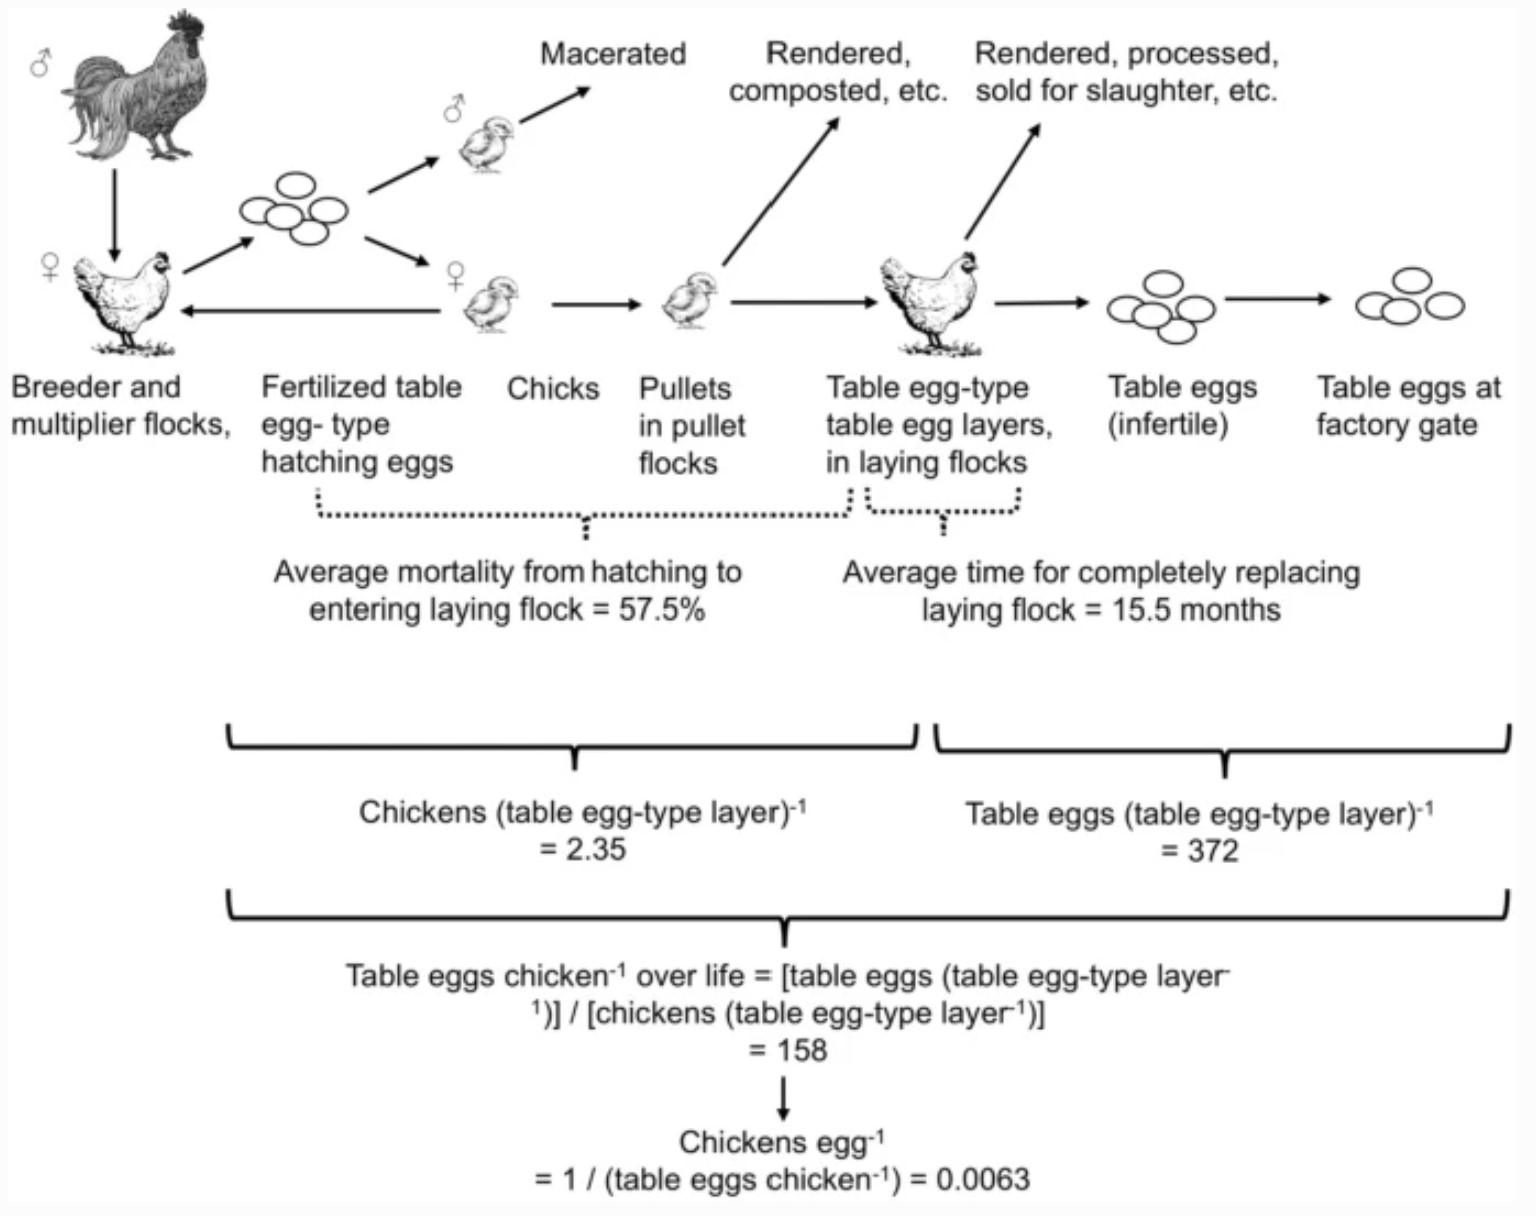 Image: Figure 1, Cleveland et al. Life cycle of table egg-type chickens, and chicken lives per egg, in the U.S. egg production industry.